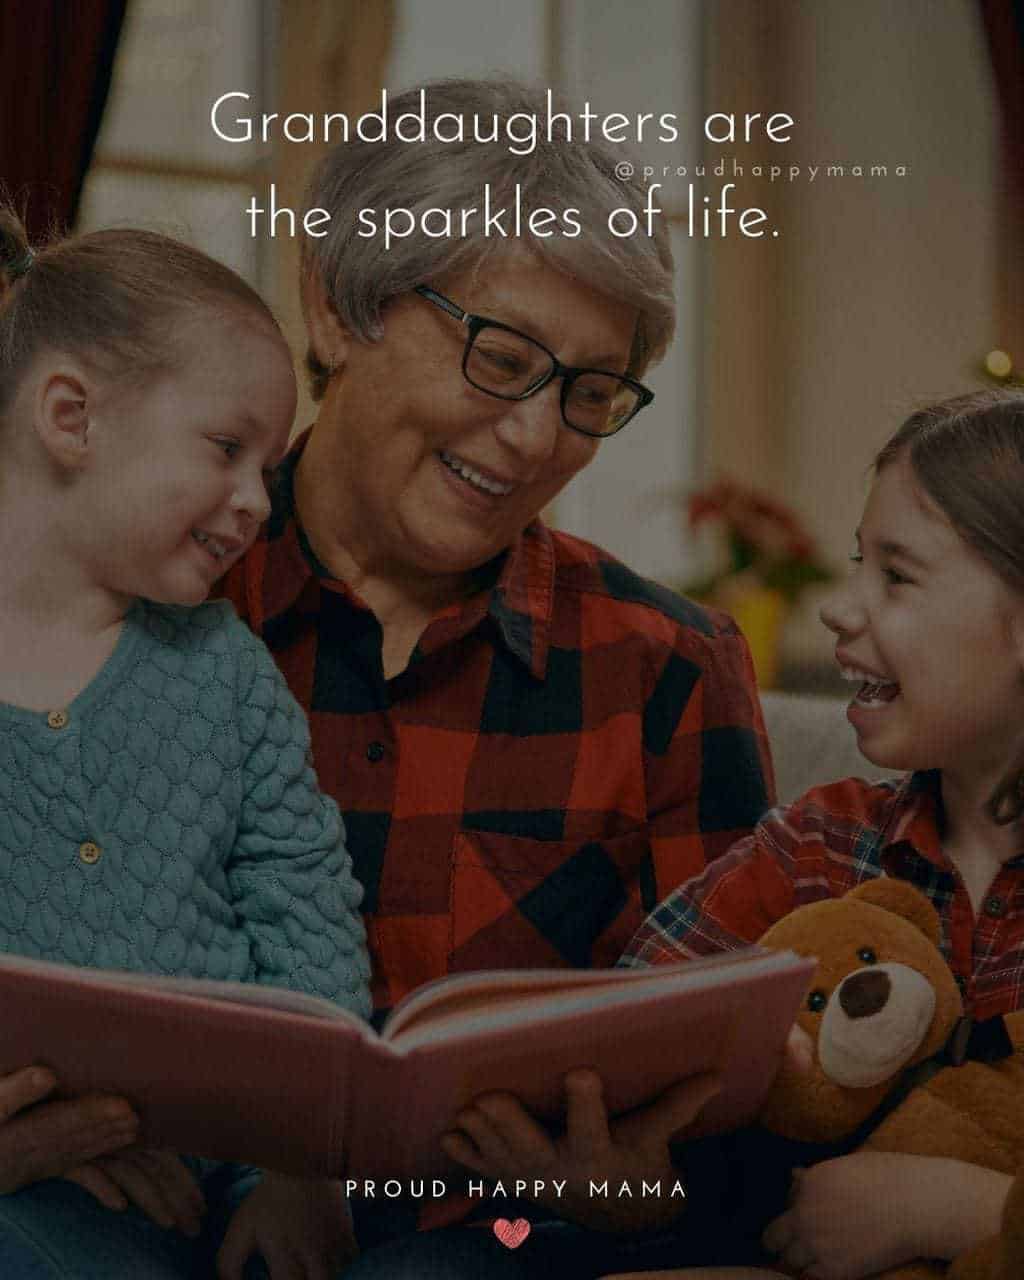 Granddaughter Quotes - Granddaughters are the sparkles of life.’